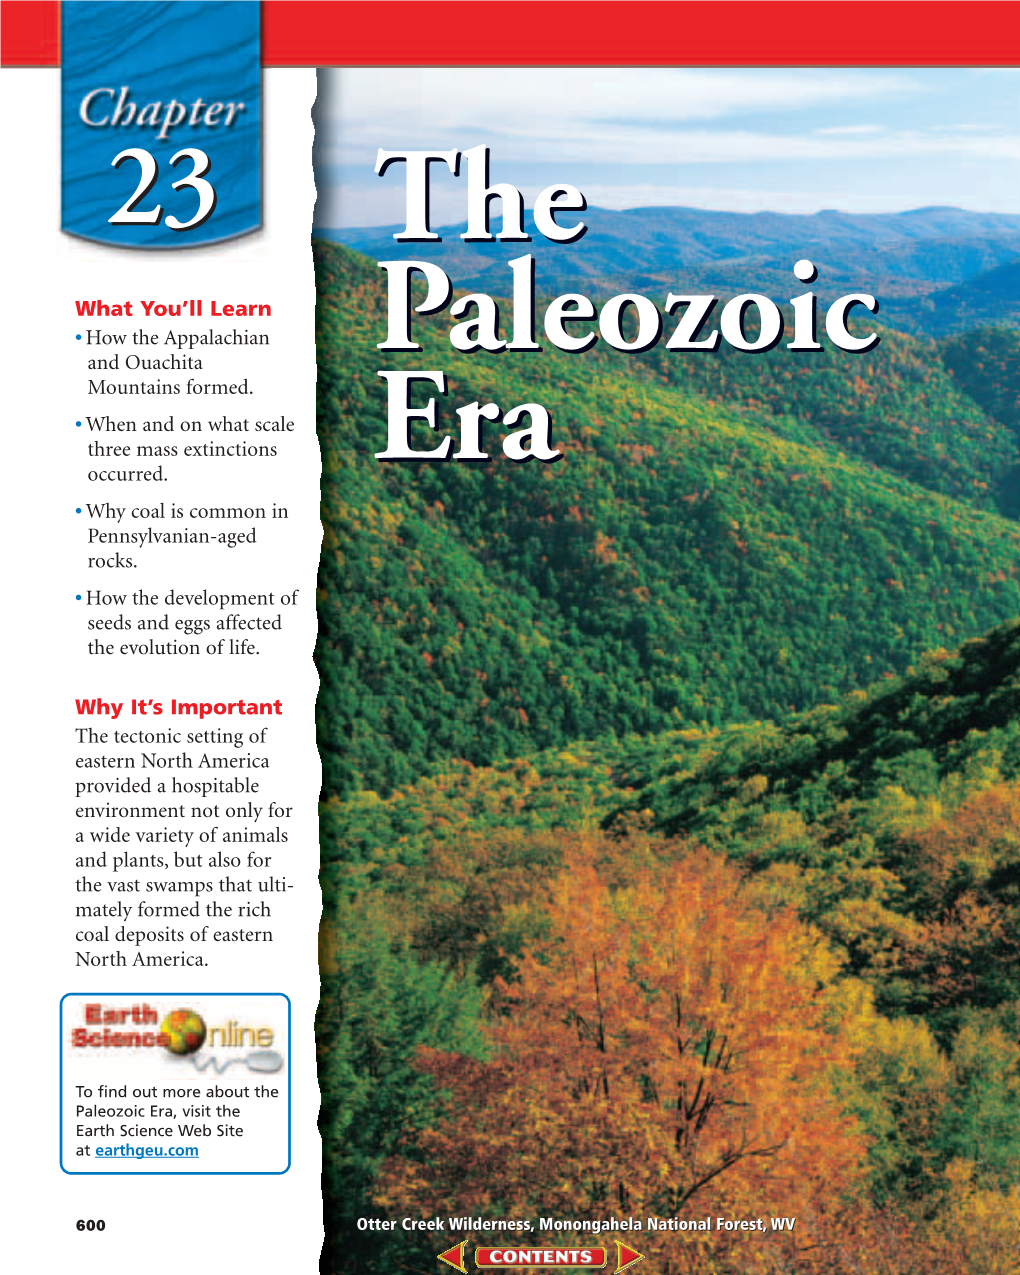 Chapter 23: the Paleozoic